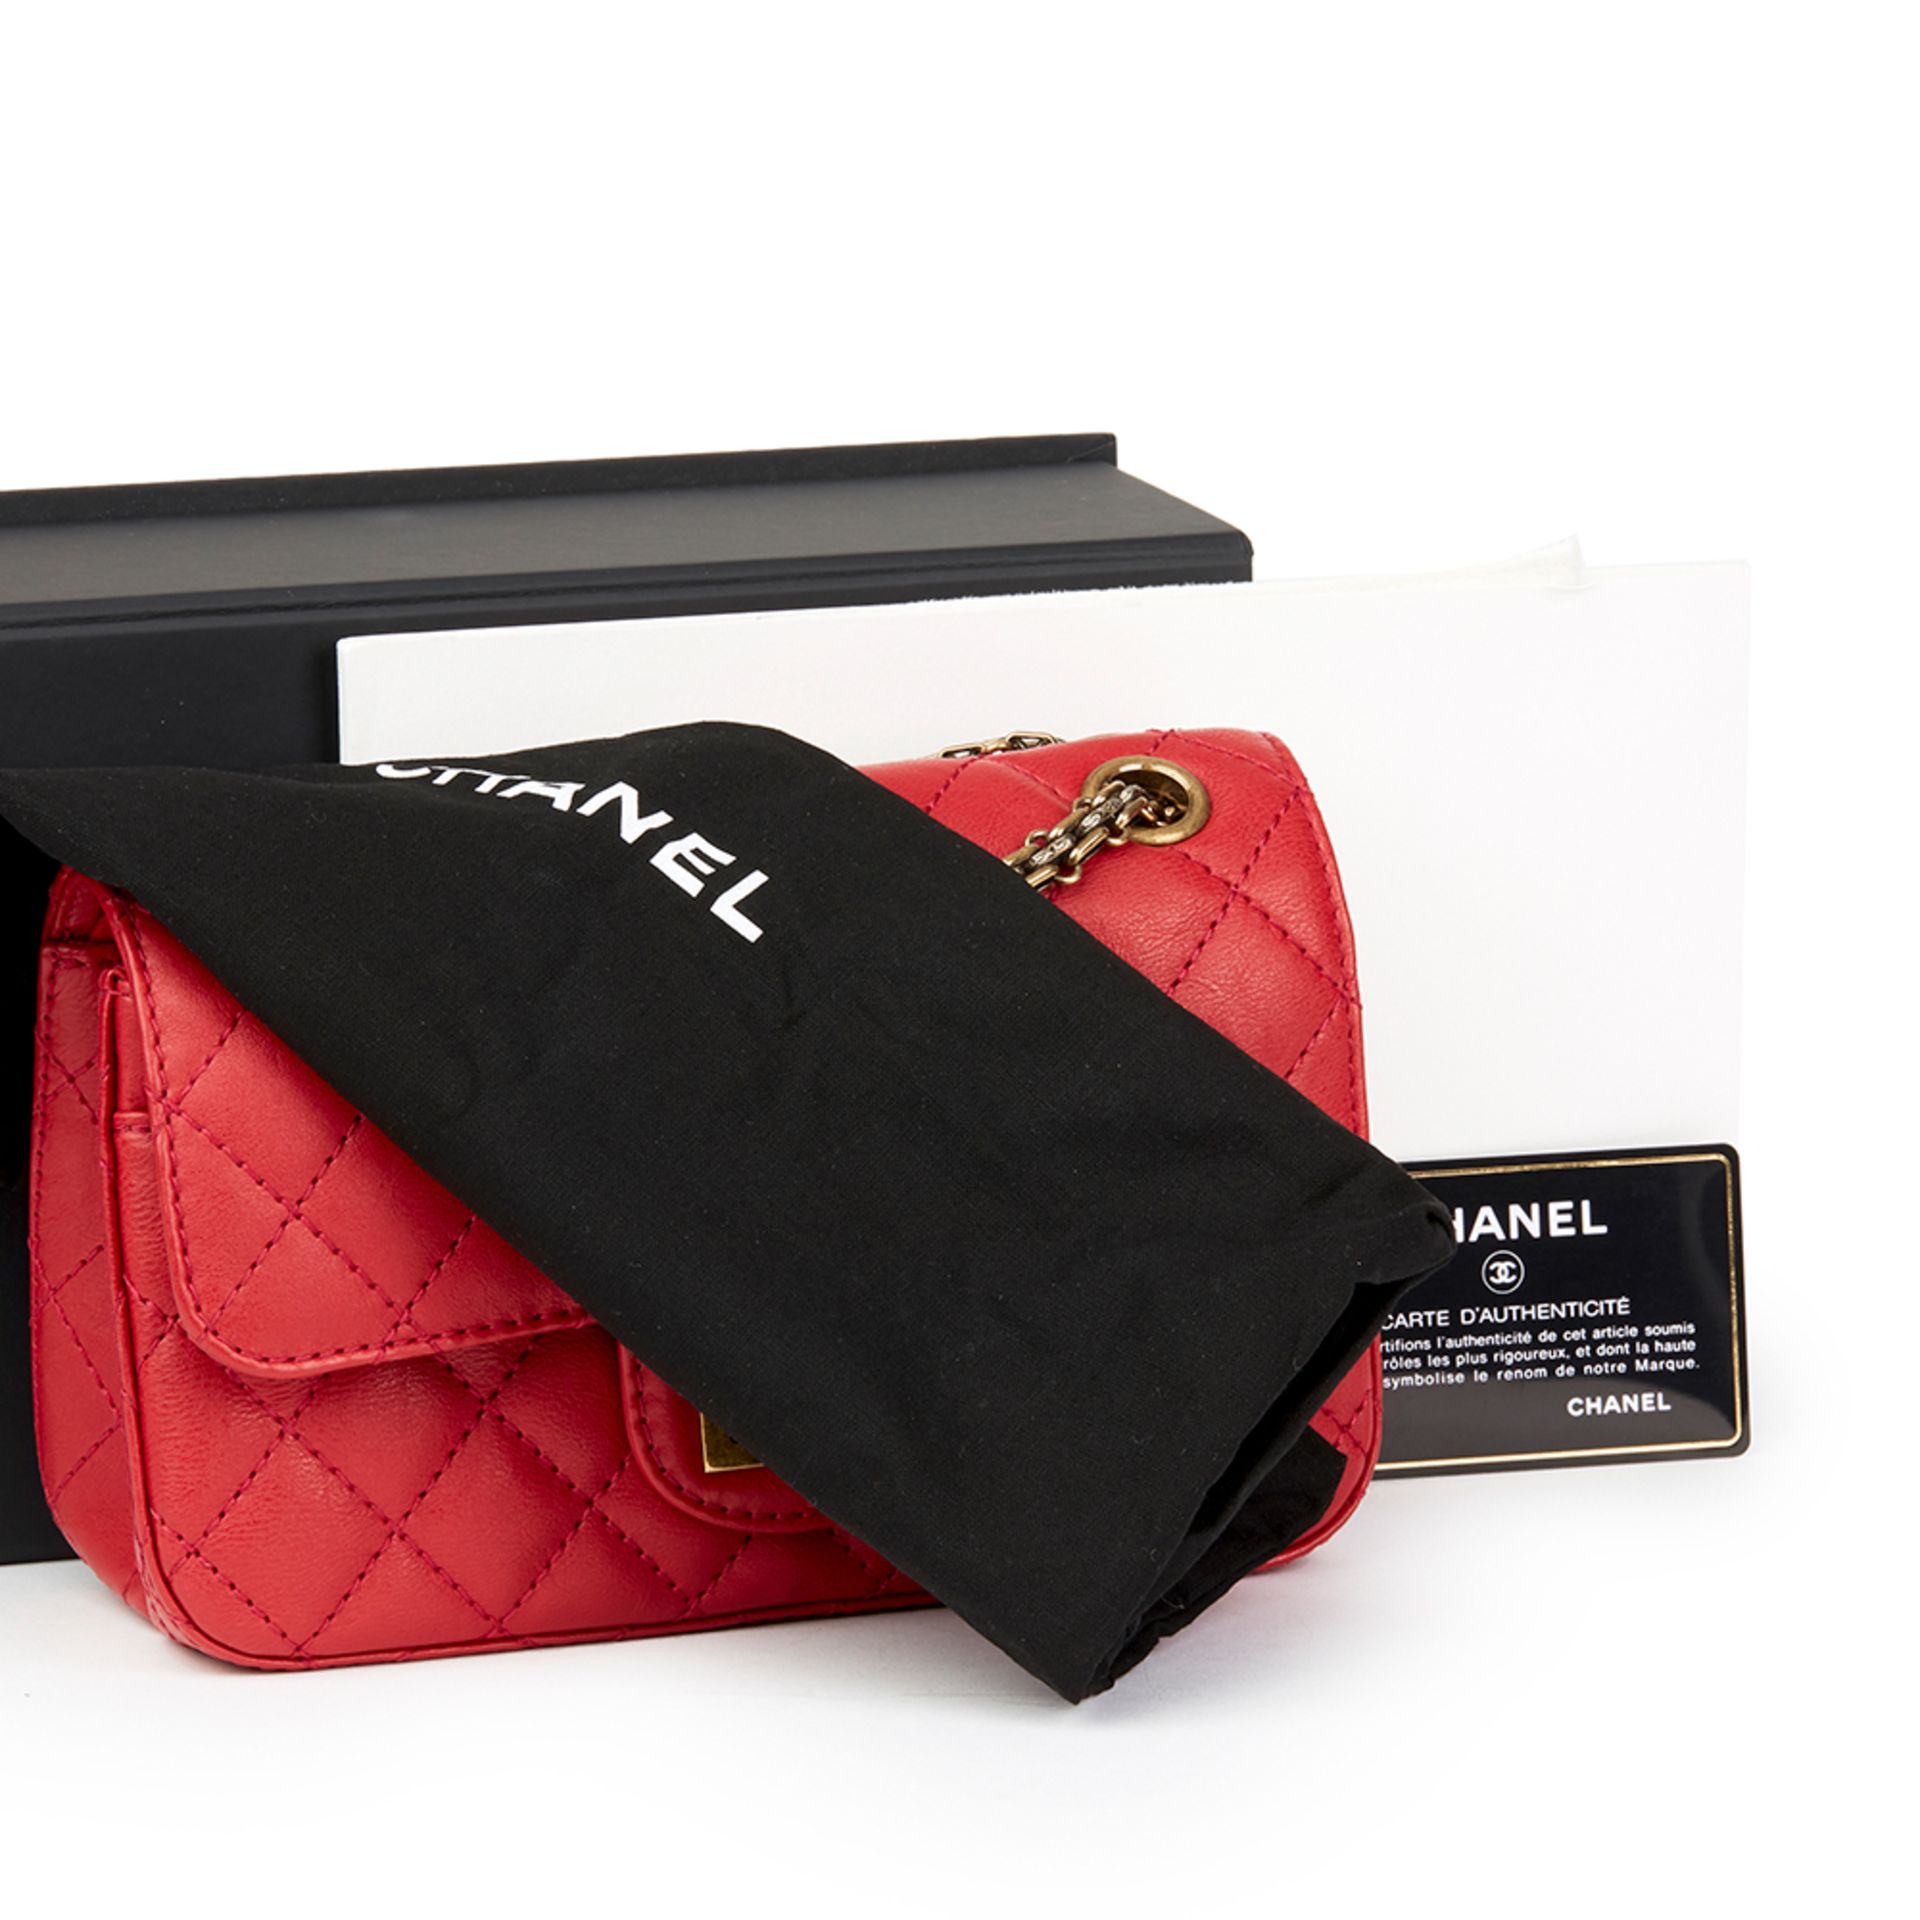 Chanel Red Quilted Calfskin Leather 2.55 Reissue 224 Double Flap Bag - Image 10 of 10